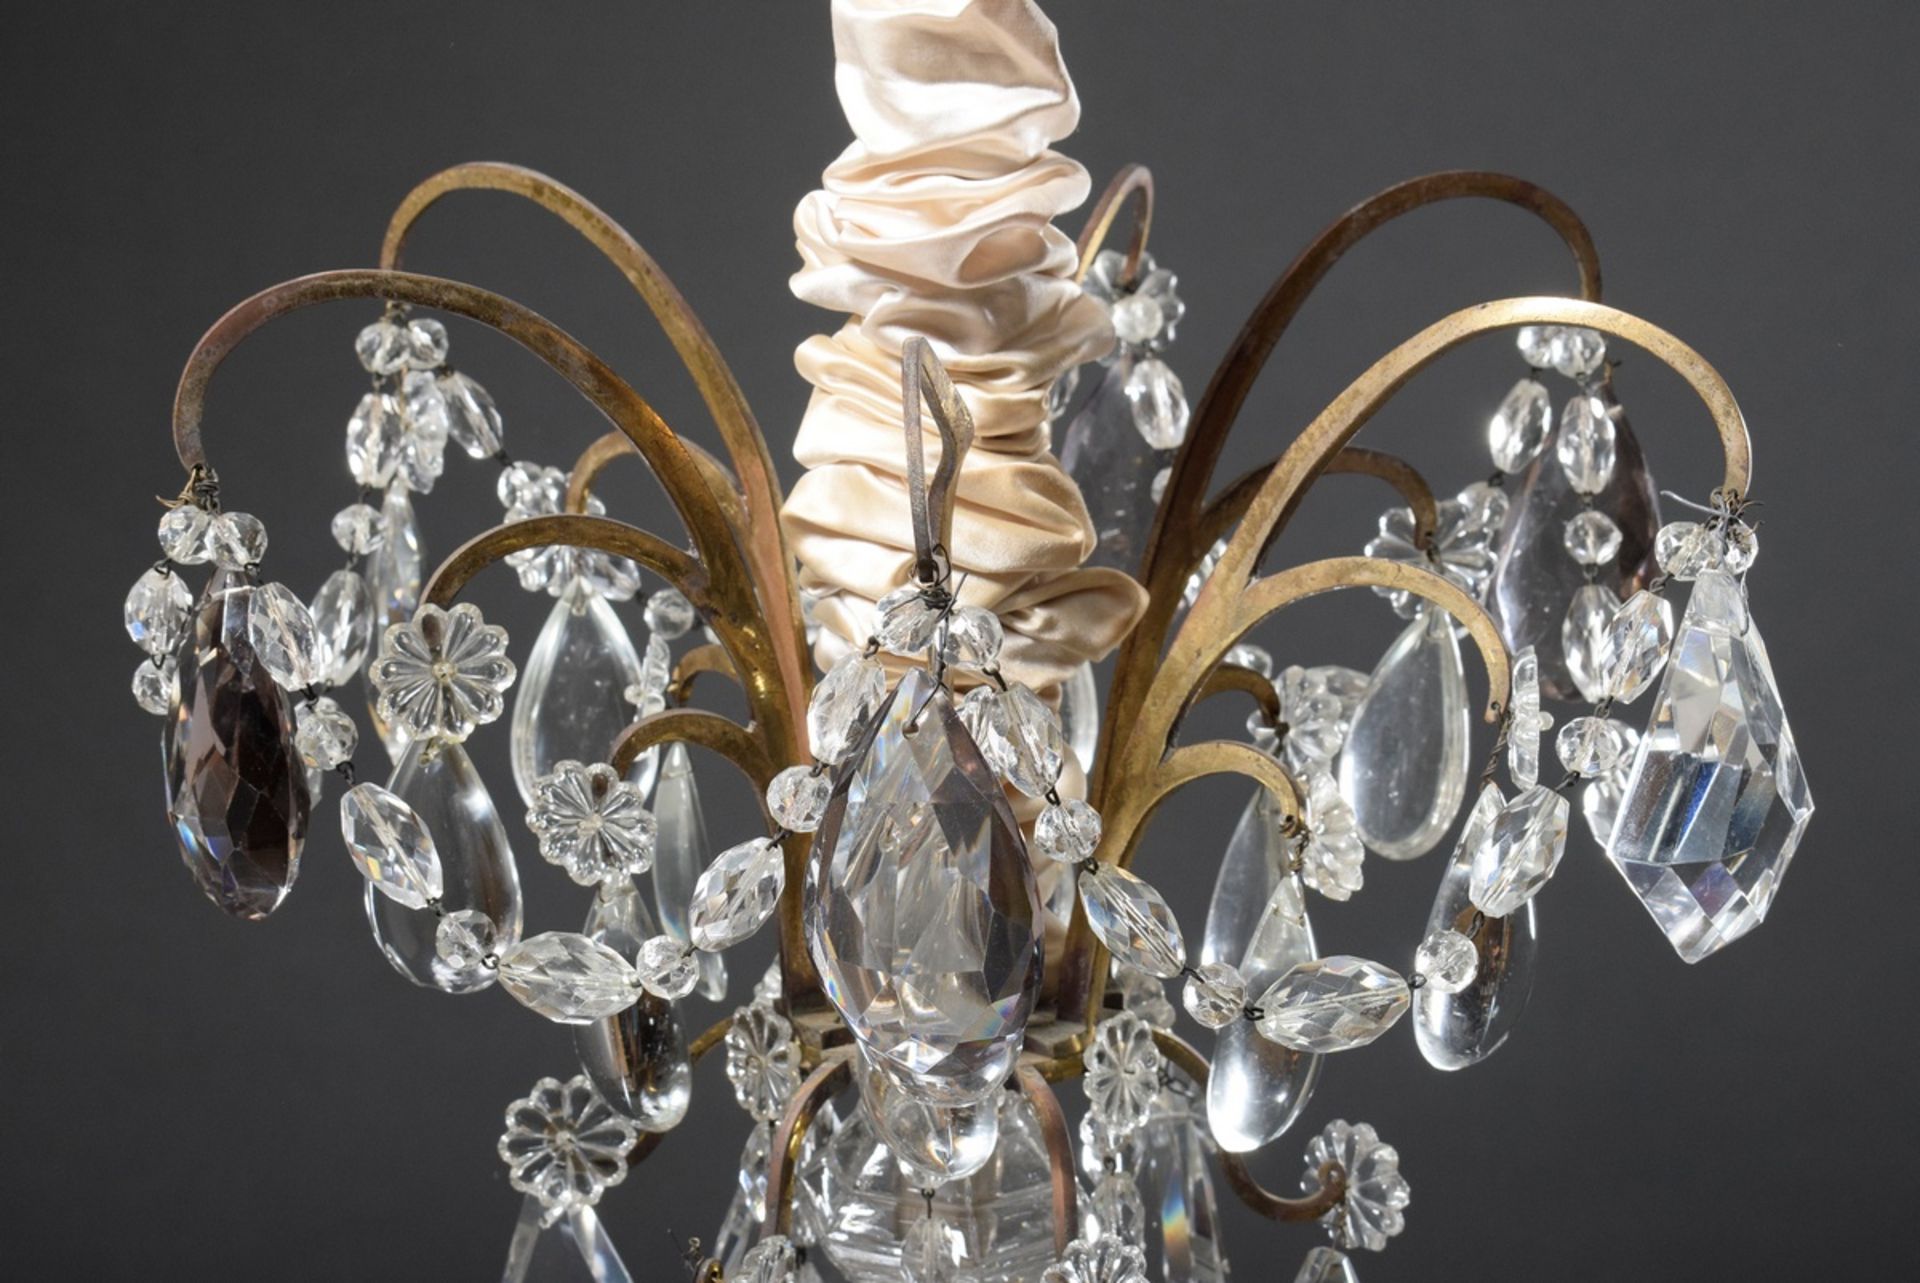 Fire-gilt bronze chandelier with elaborate prismatic hangings and cut balusters on a triangular bas - Image 9 of 9